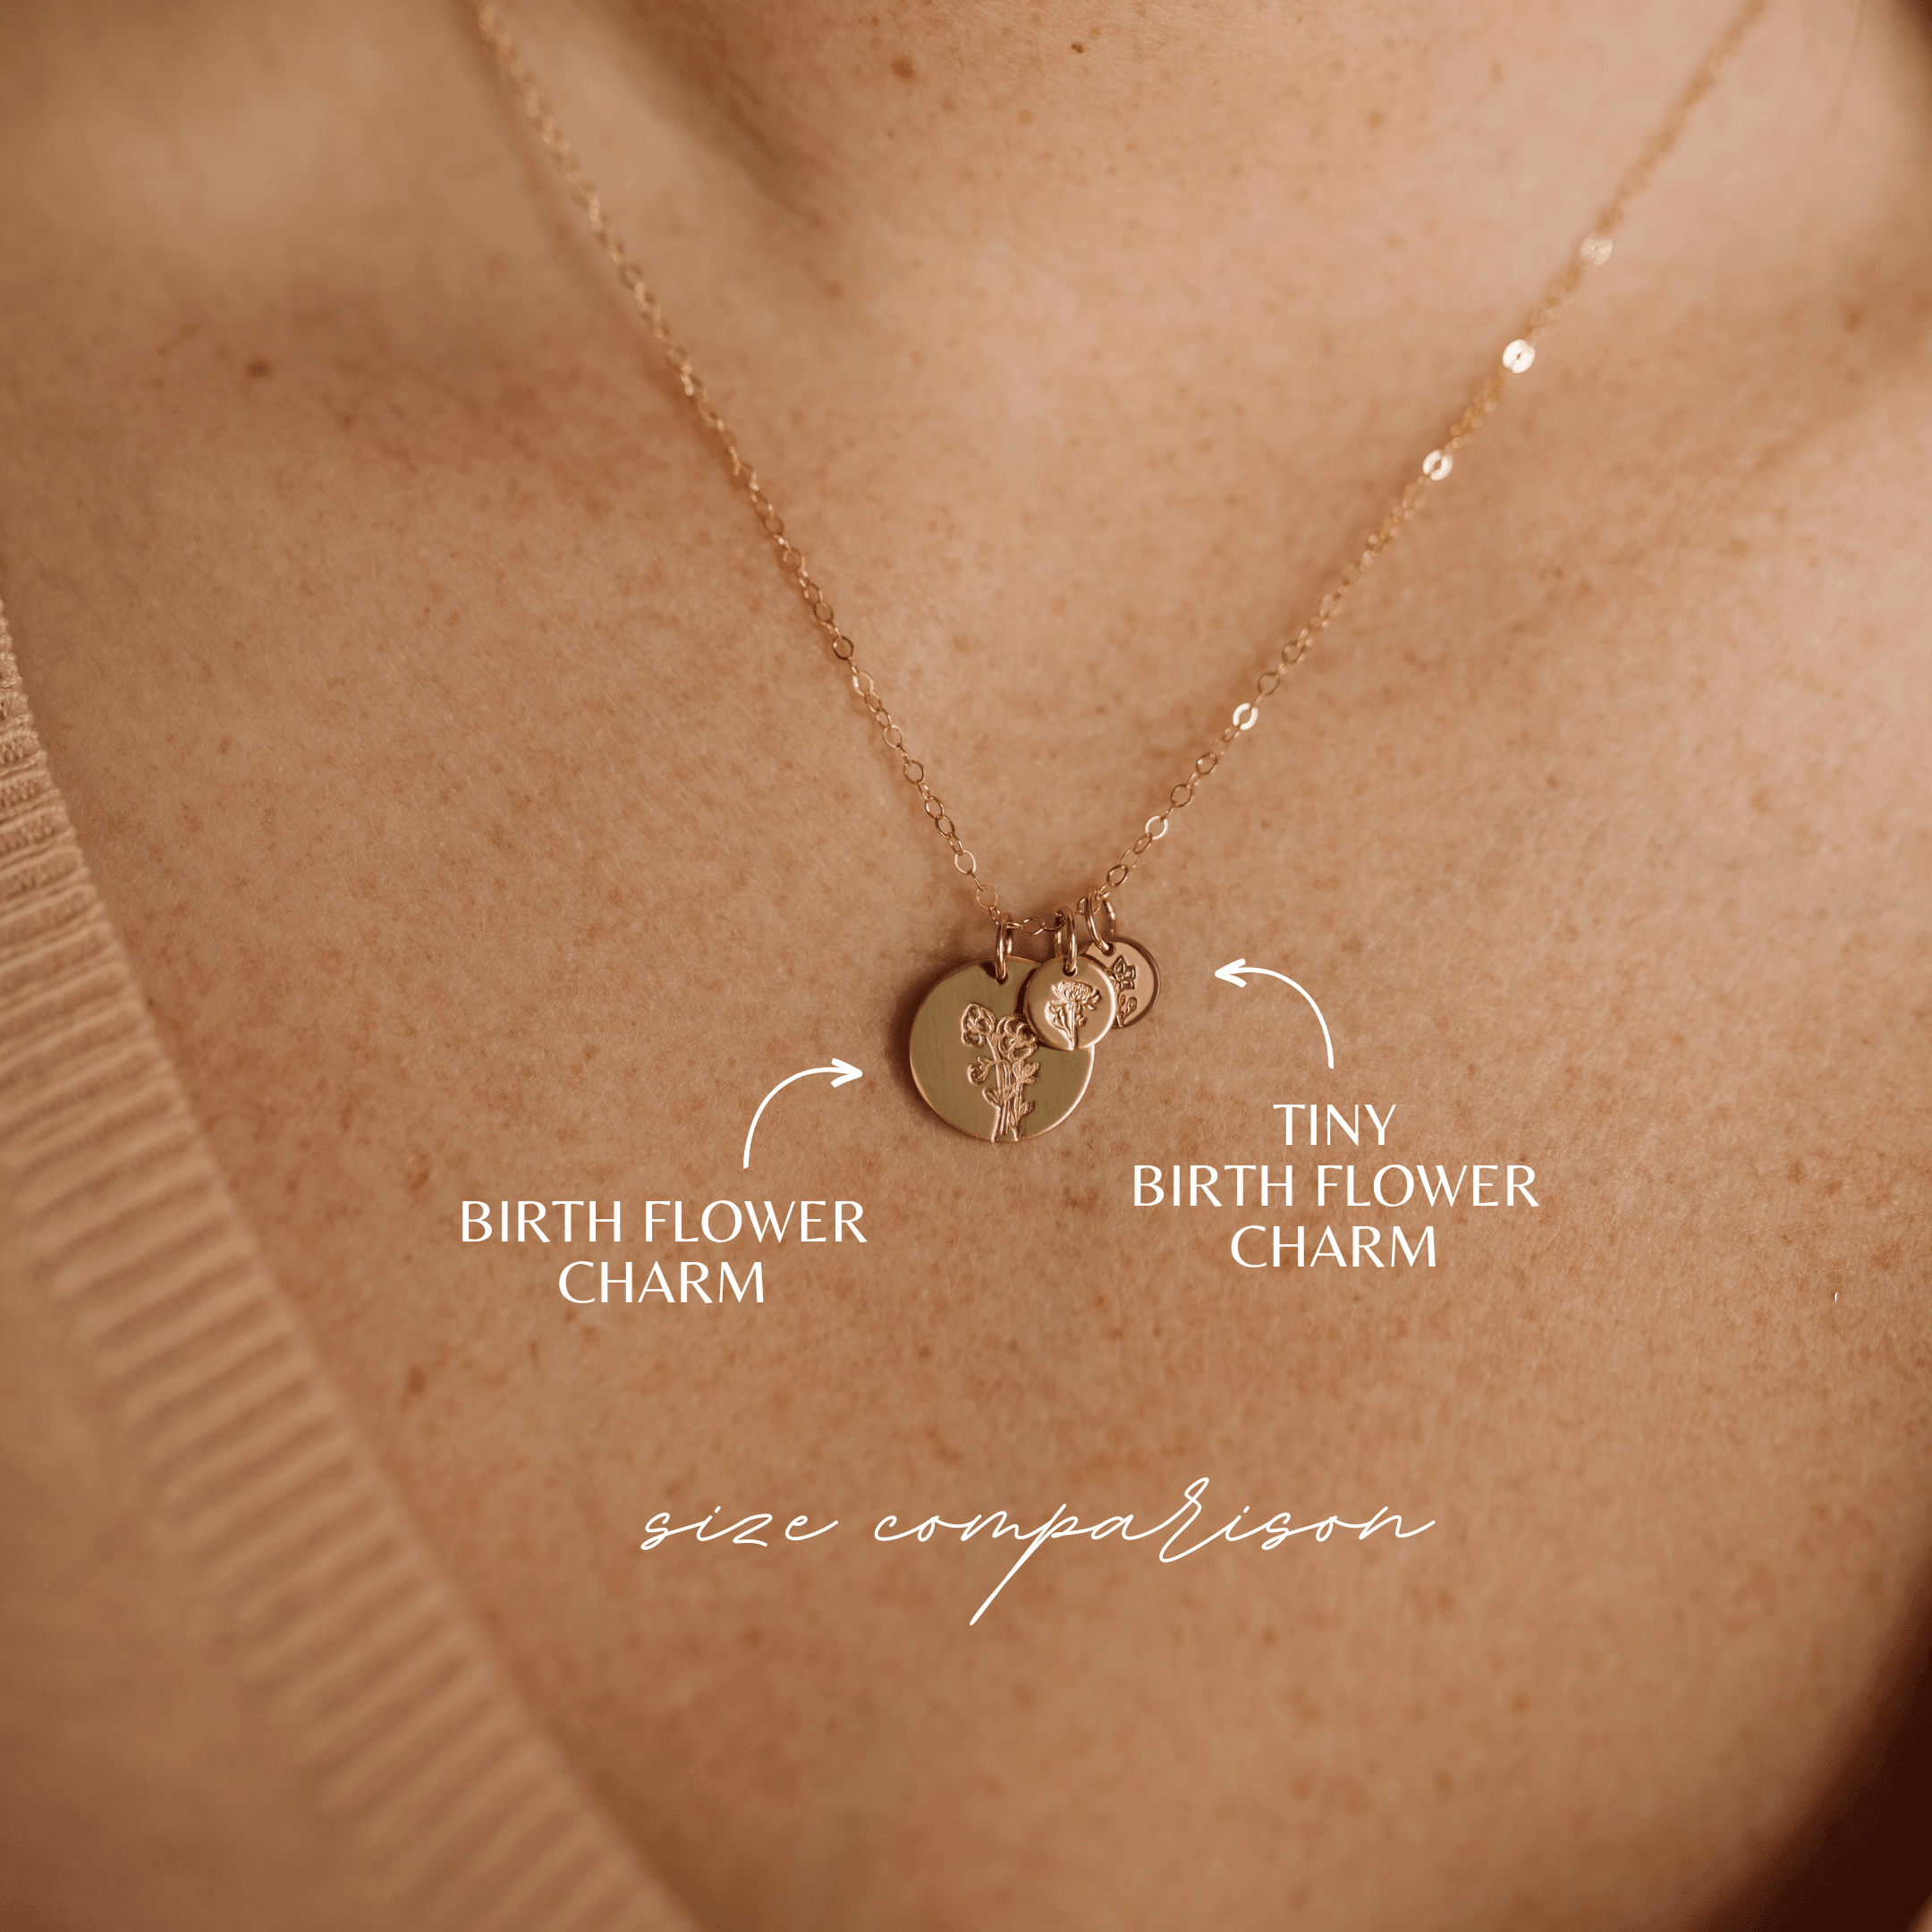 Tiny Birth Flower Necklace - Nolia Jewelry - Meaningful + Sustainably Handcrafted Jewelry